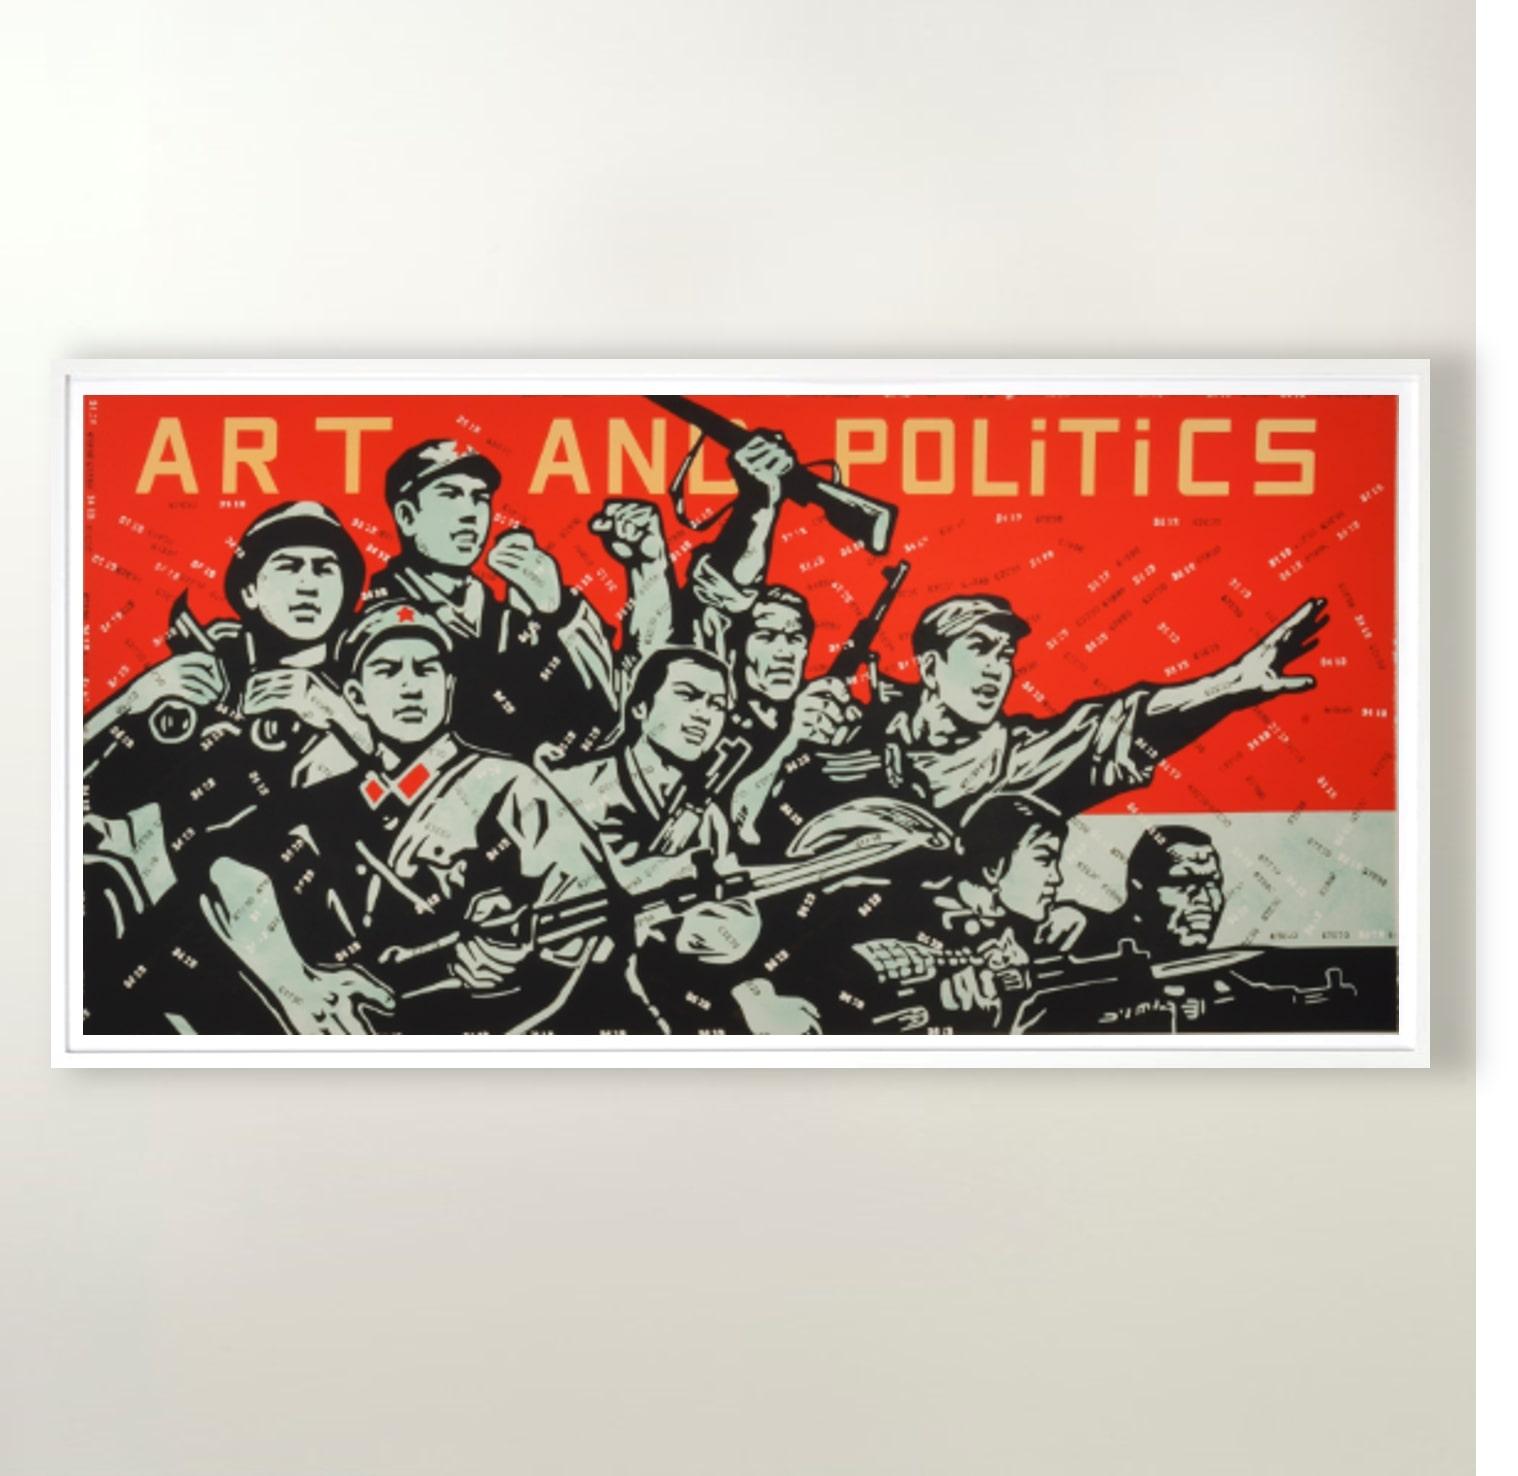 Wang Guangyi, Art and Politics
Contemporary, 21st Century, Lithograph, Limited Edition
Lithograph accompanied by poem by Fernando Arrabal
80 x 120 cm (31.5 x 47.2 in.)
Edition of 165 plus 4 APs
Signed and numbered, accompanied by Certificate of